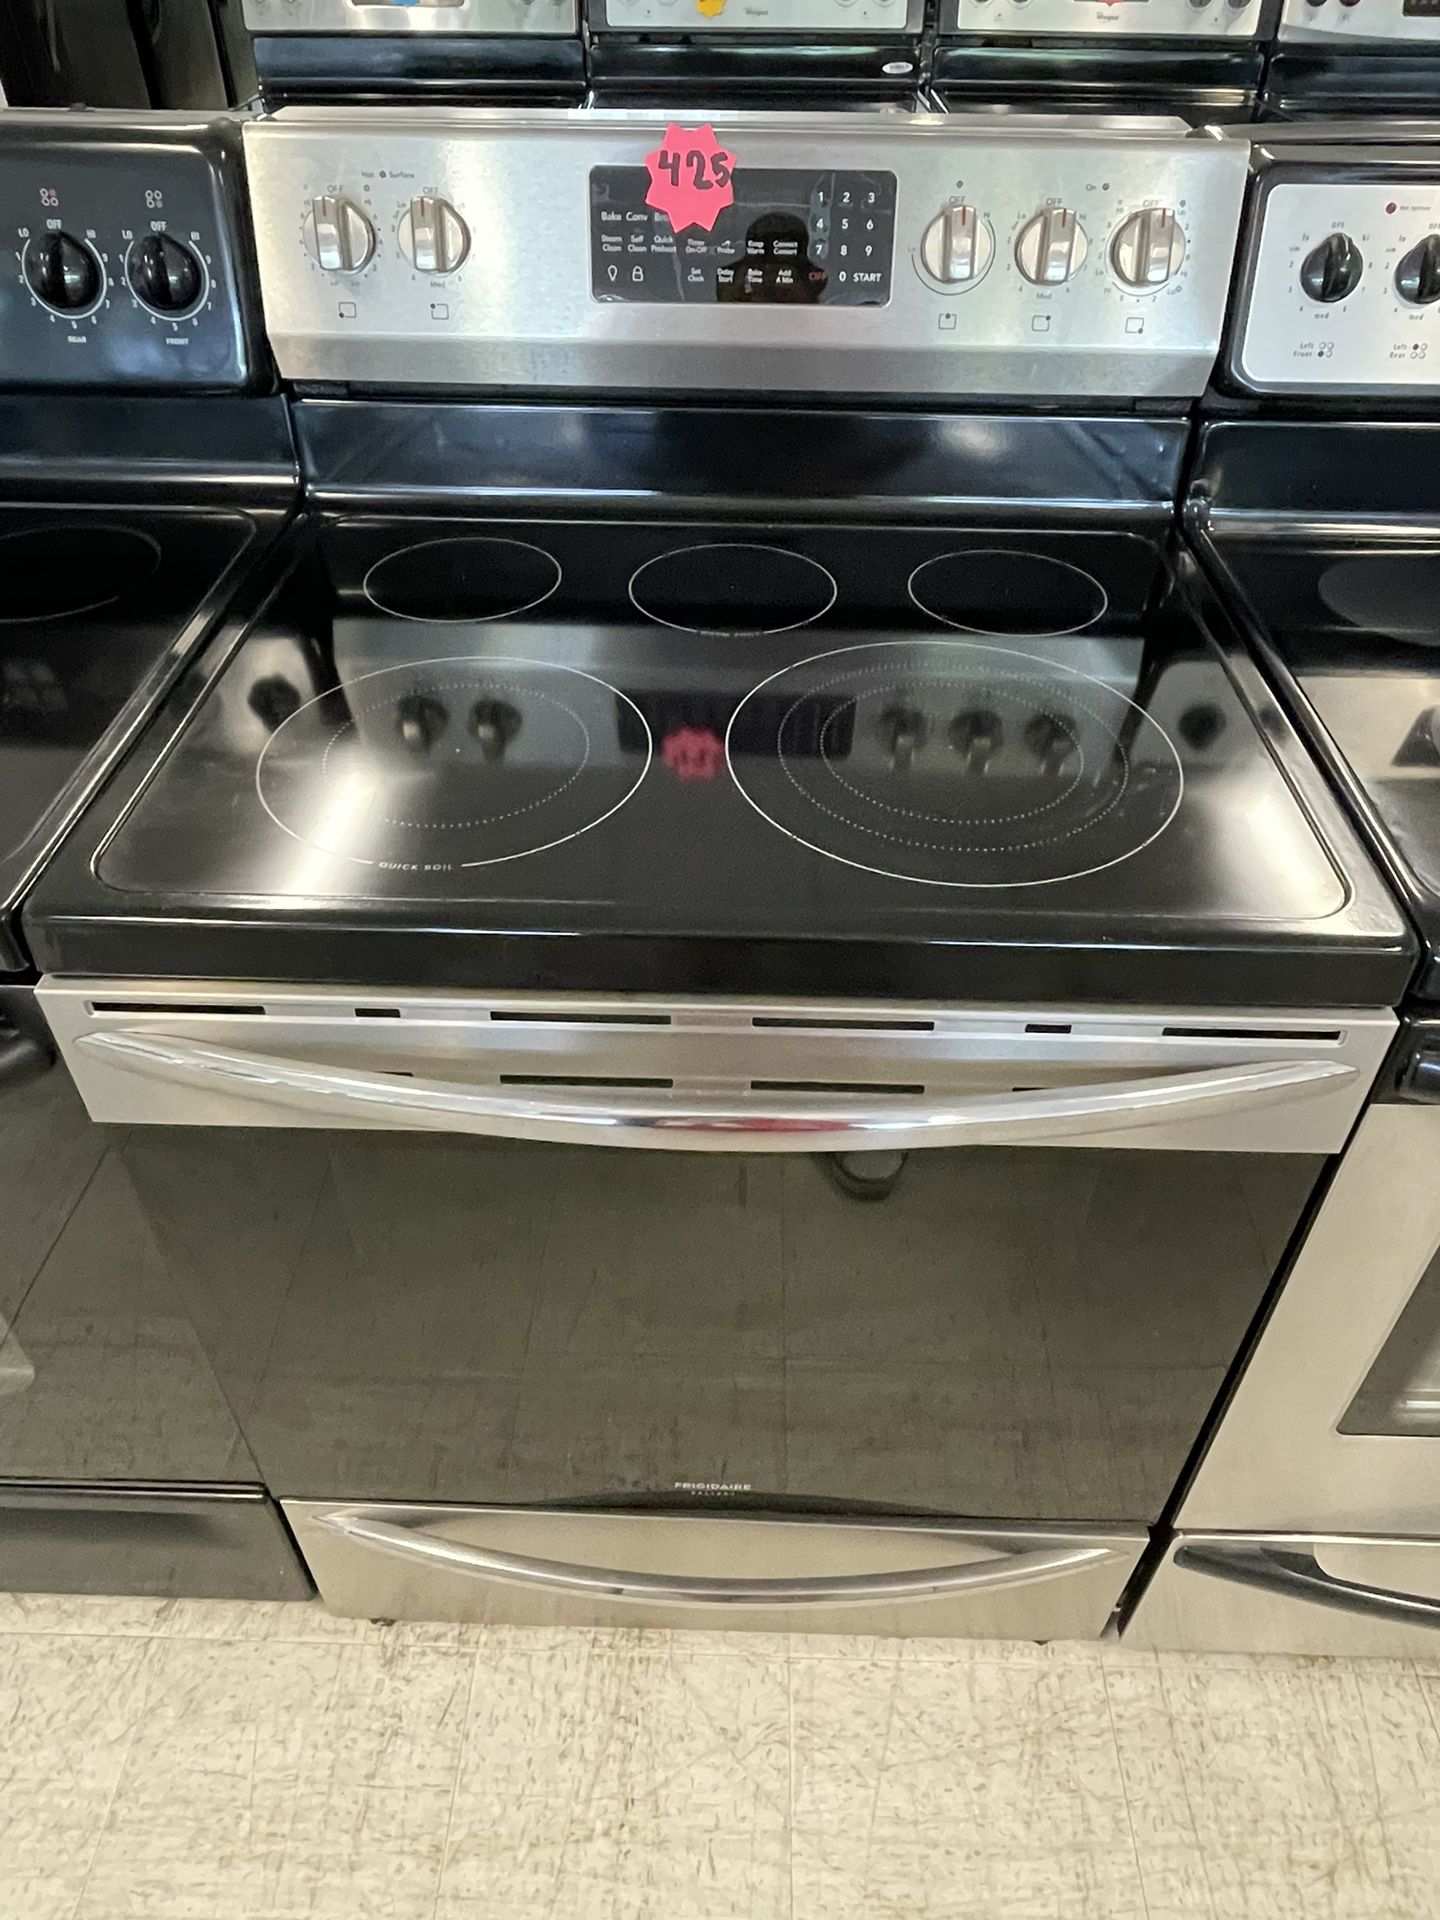 Frigidaire Electric Stove Used In Good Condition With 90days Warranty 